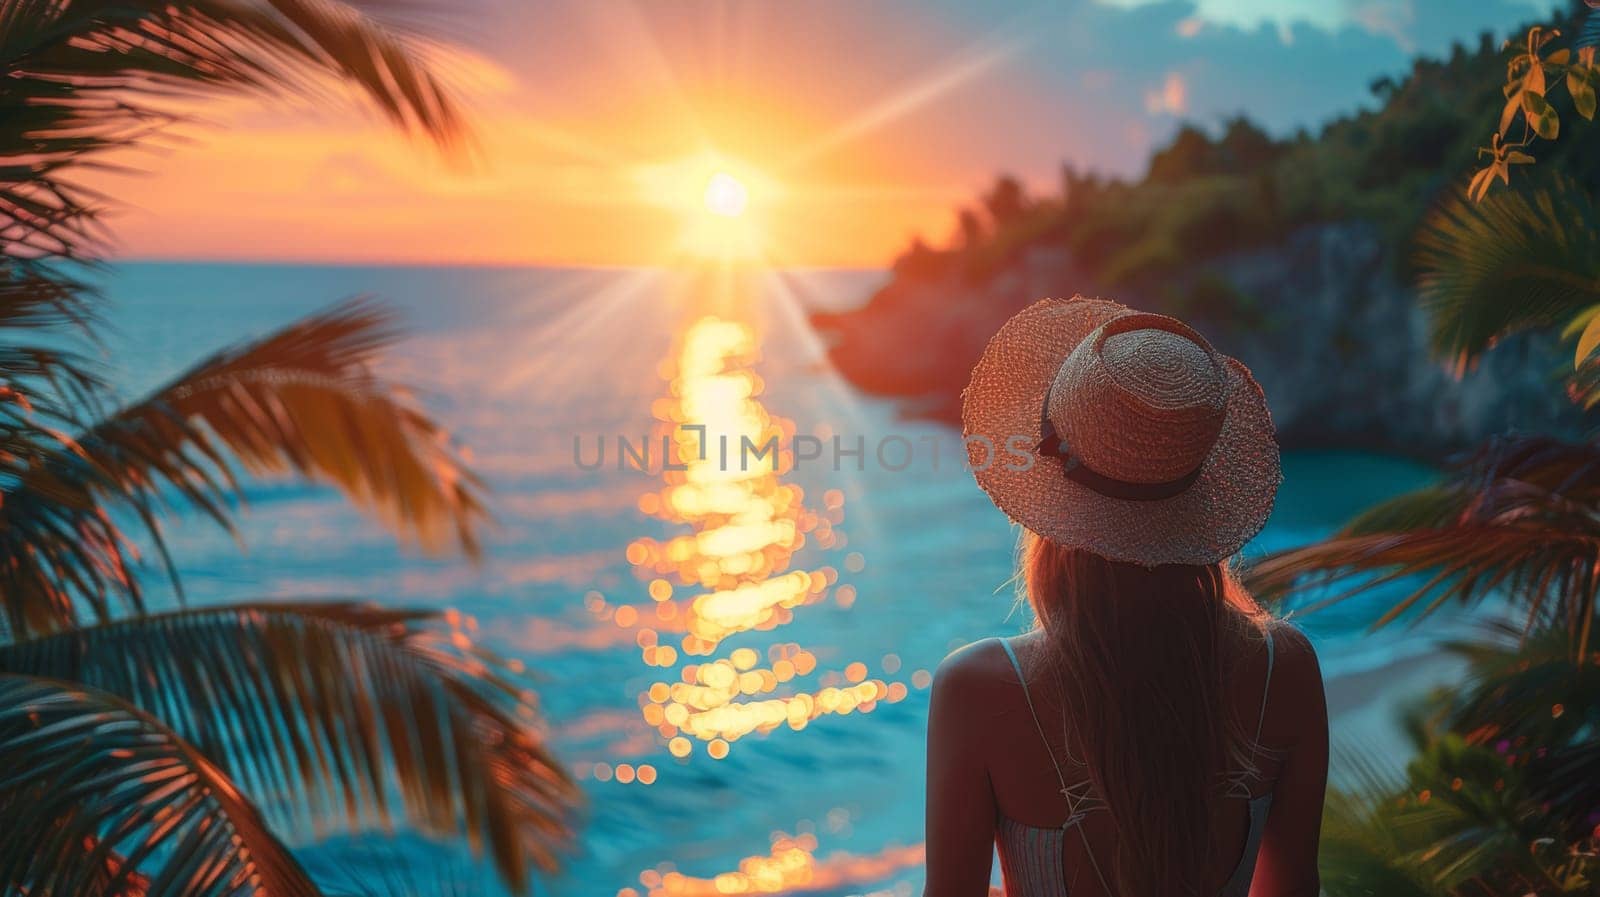 Tropical coast, beach. A girl in a hat at sunset. Sea view. Summer day.